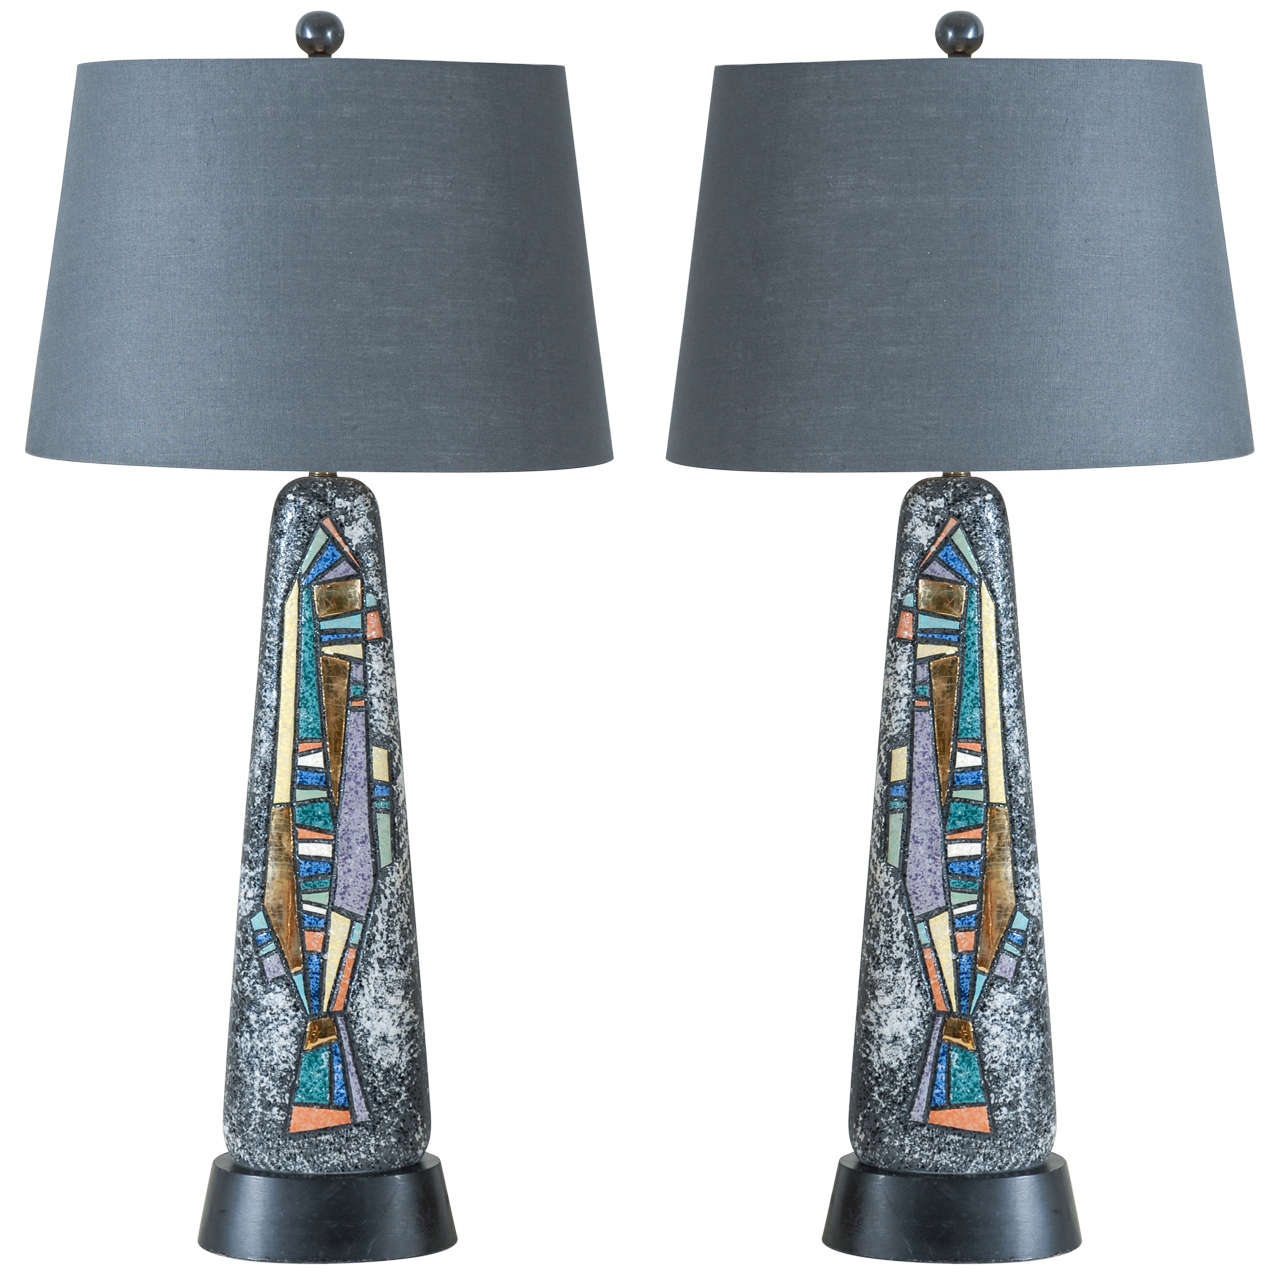 Stunning Pair of Large Scale Abstract Ceramic Lamps